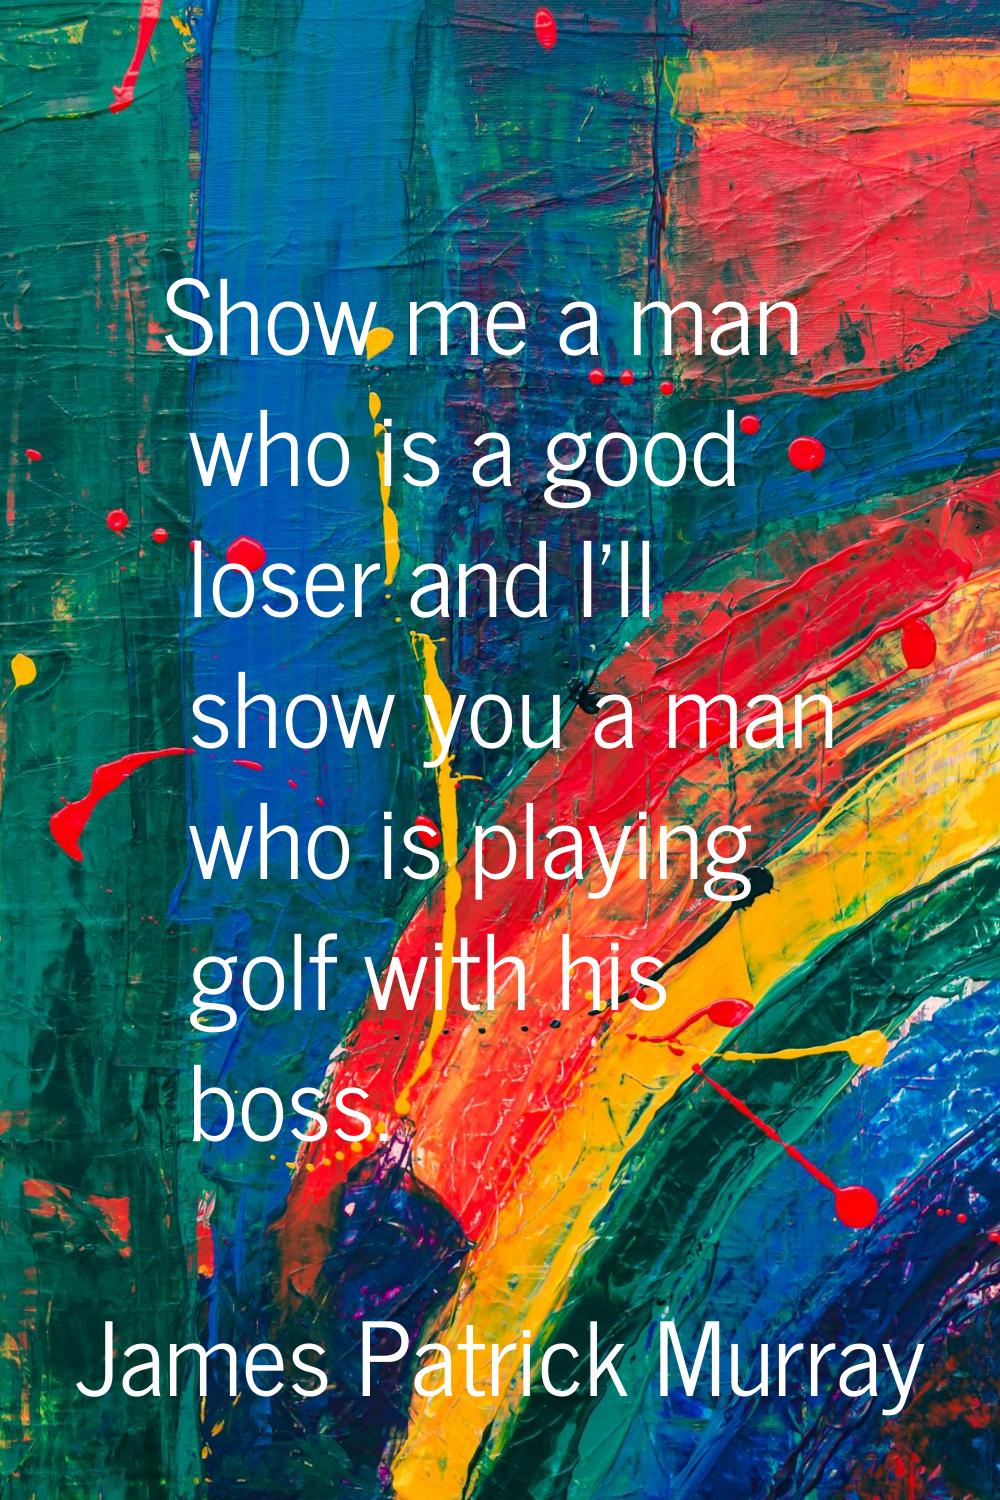 Show me a man who is a good loser and I'll show you a man who is playing golf with his boss.